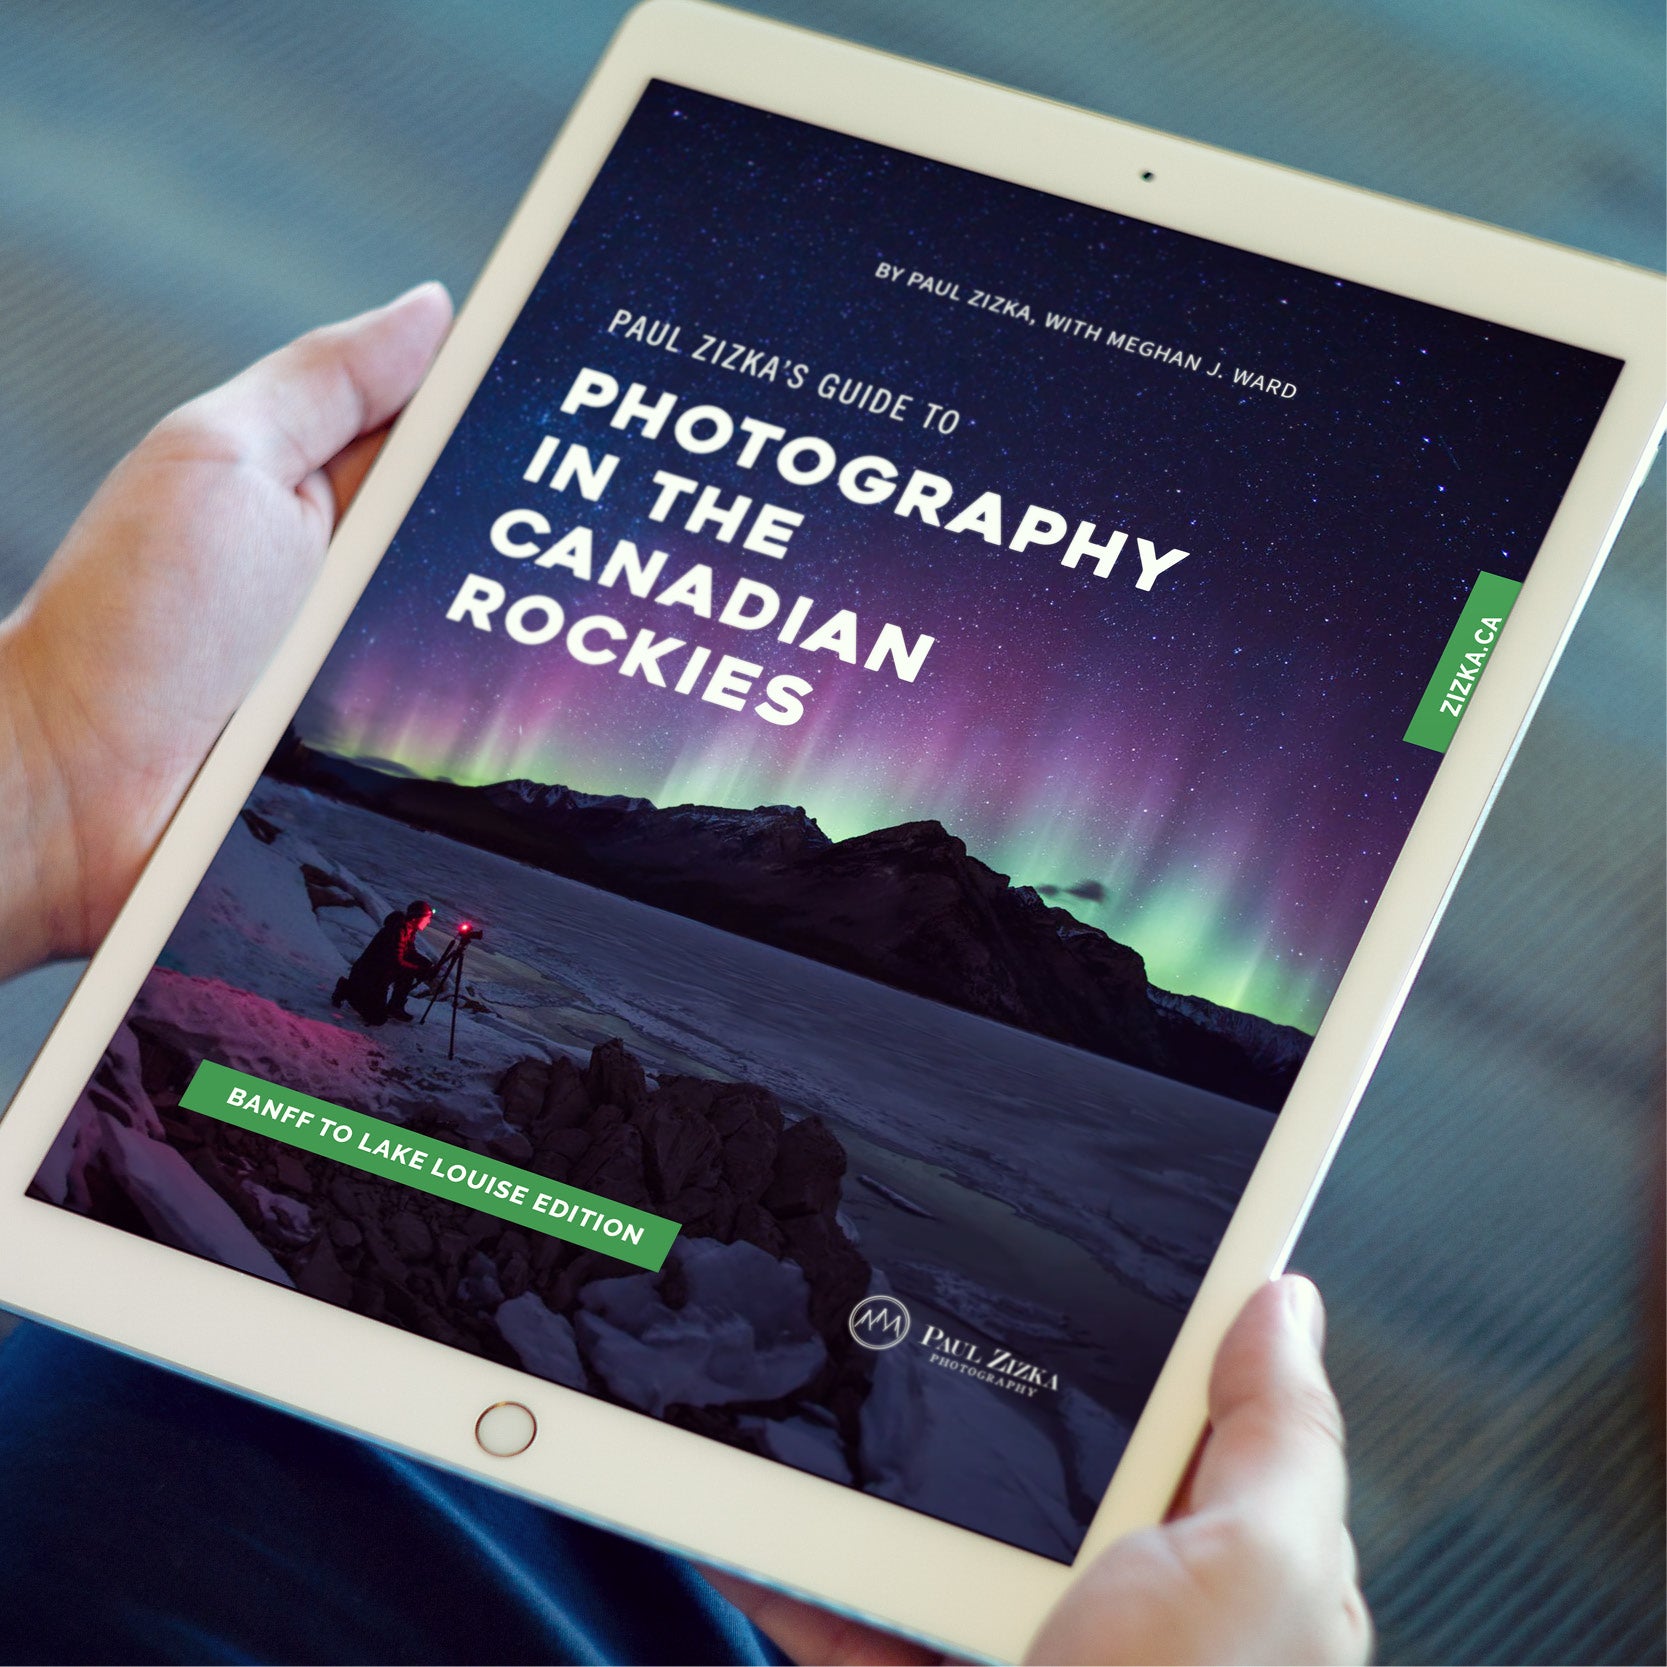 eBook: Paul Zizka's Guide to Photography in the Canadian Rockies - Banff to Lake Louise Edition